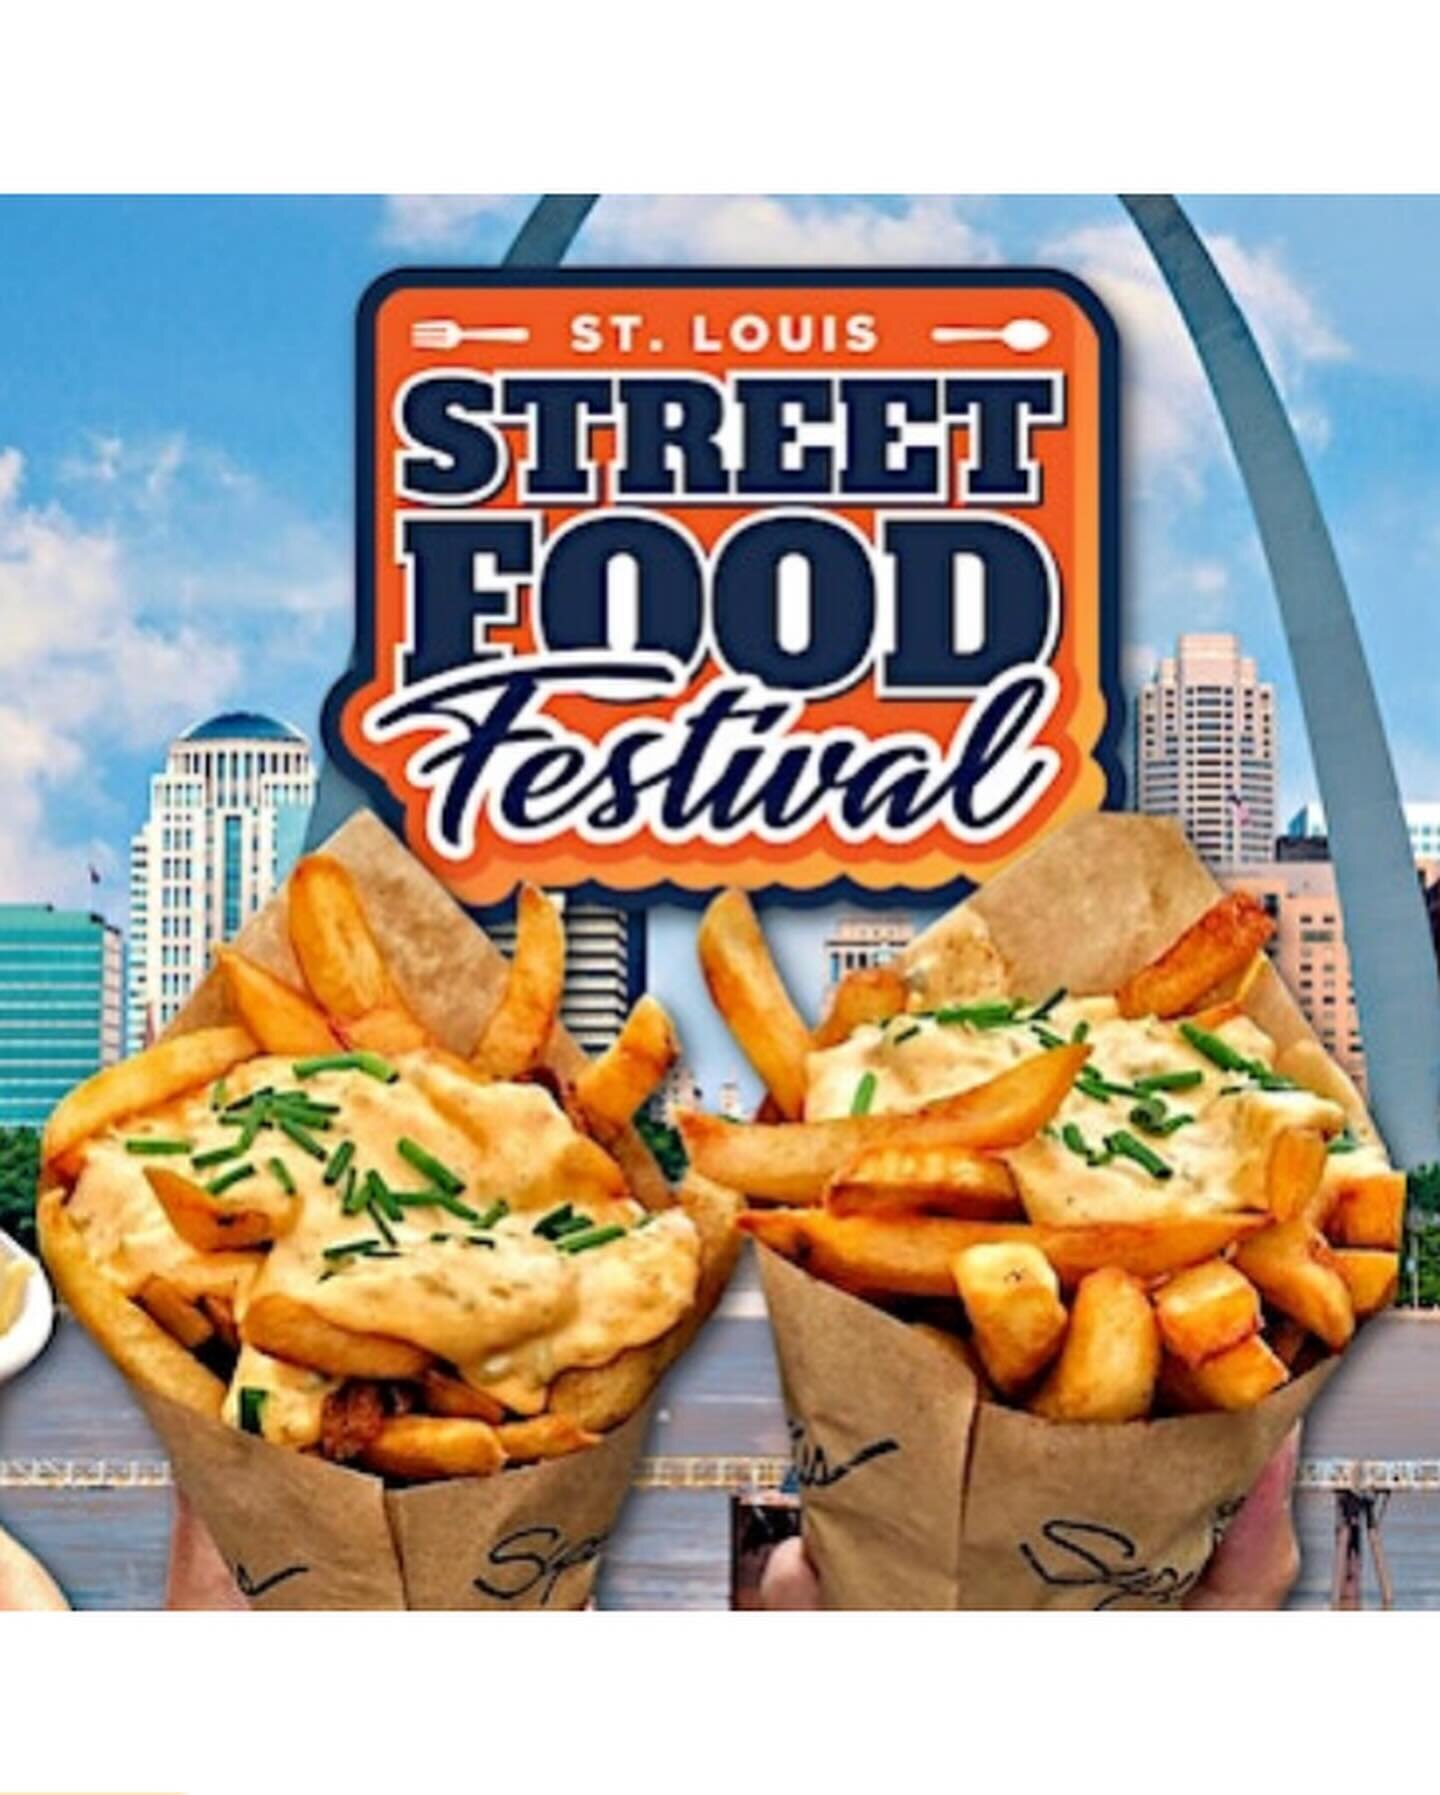 #FOODANDDRINK EVENTS IN #STL 
 
- #streetfoodfestival at @bpvstl 10/14&amp;15

- #oktoberfest🍻 at  @sixflagsstlouis until 10/29 on Saturdays and Sundays only.

- #thevibe brunch by at @gourmetsoulstl 10/7 @ 11am

- #tacosandmargaritas  festival 10/2